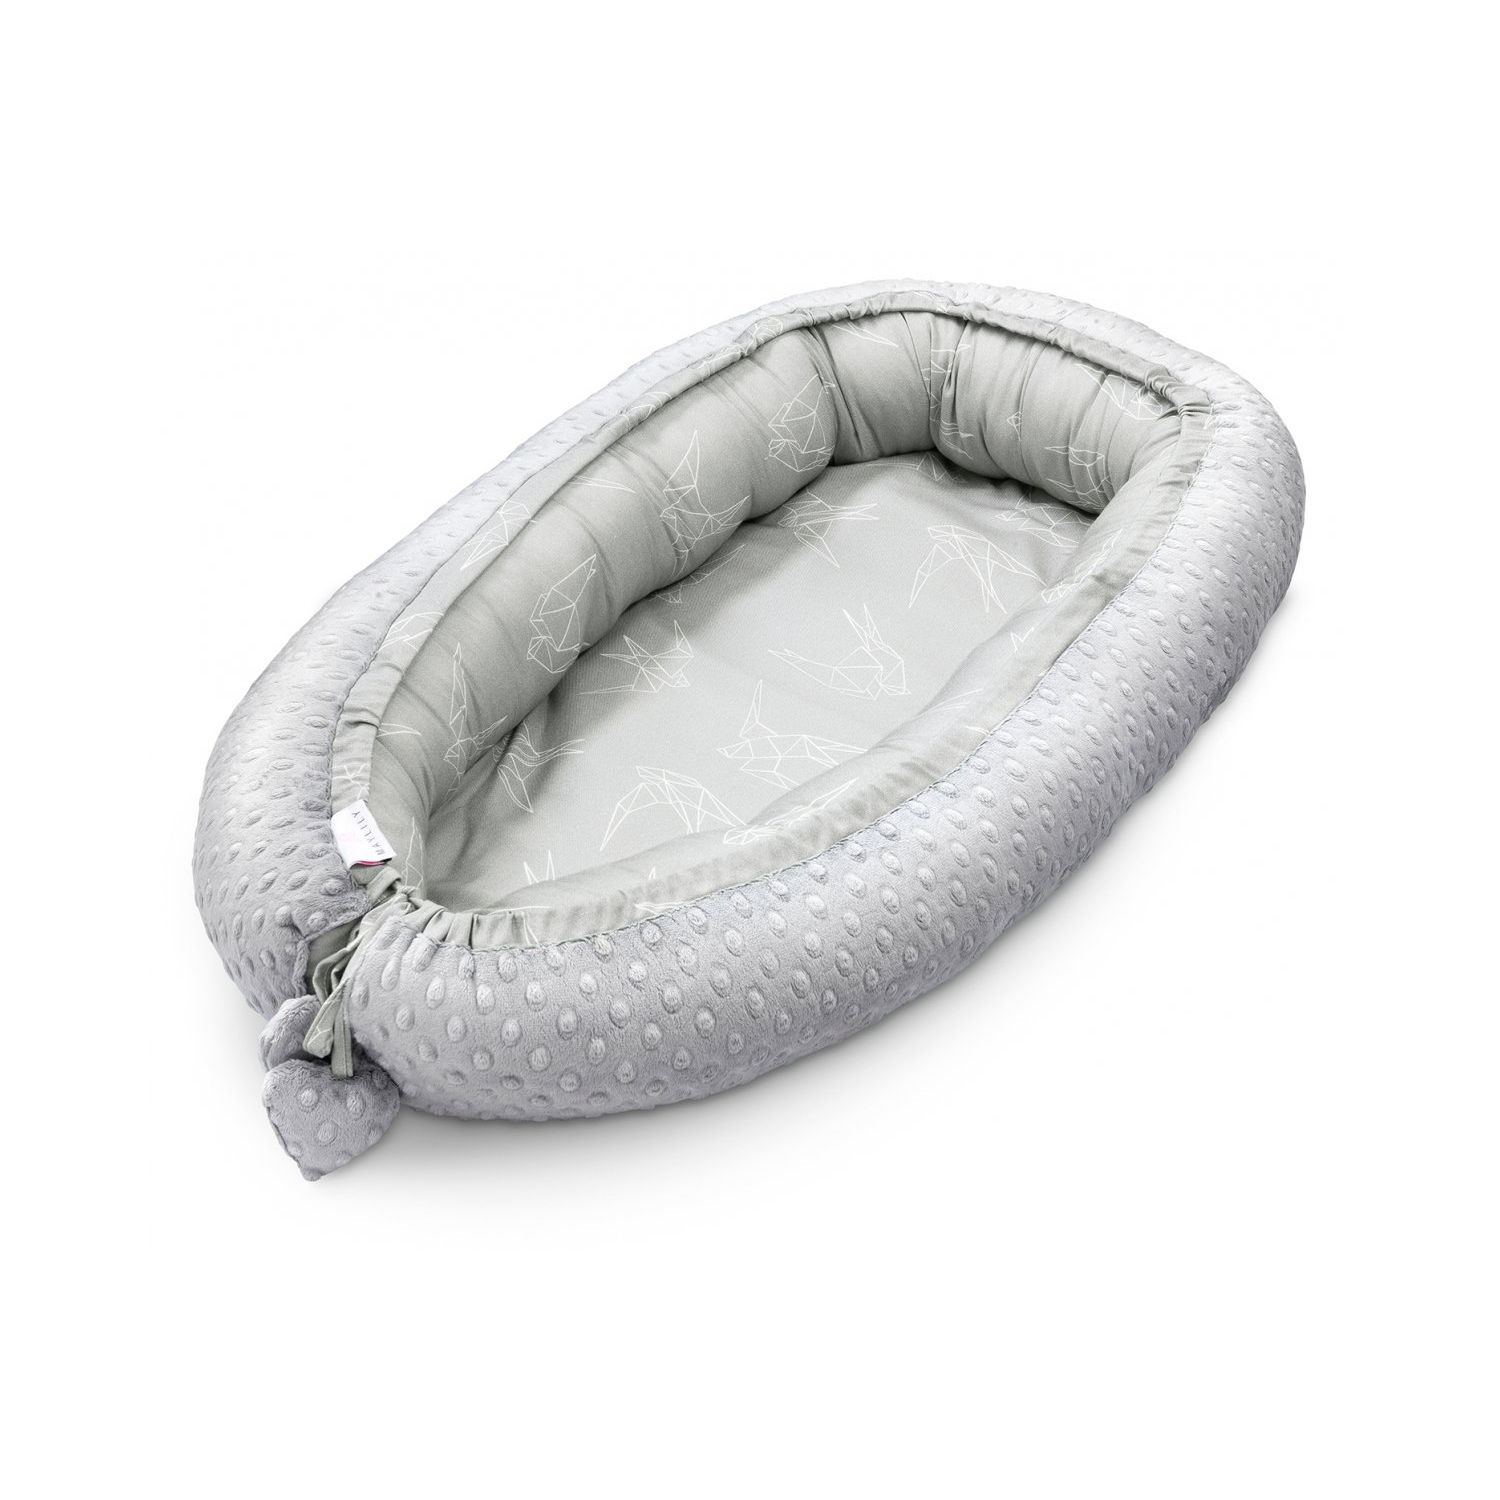 MAYLILY Premium baby nest - Swallows silver